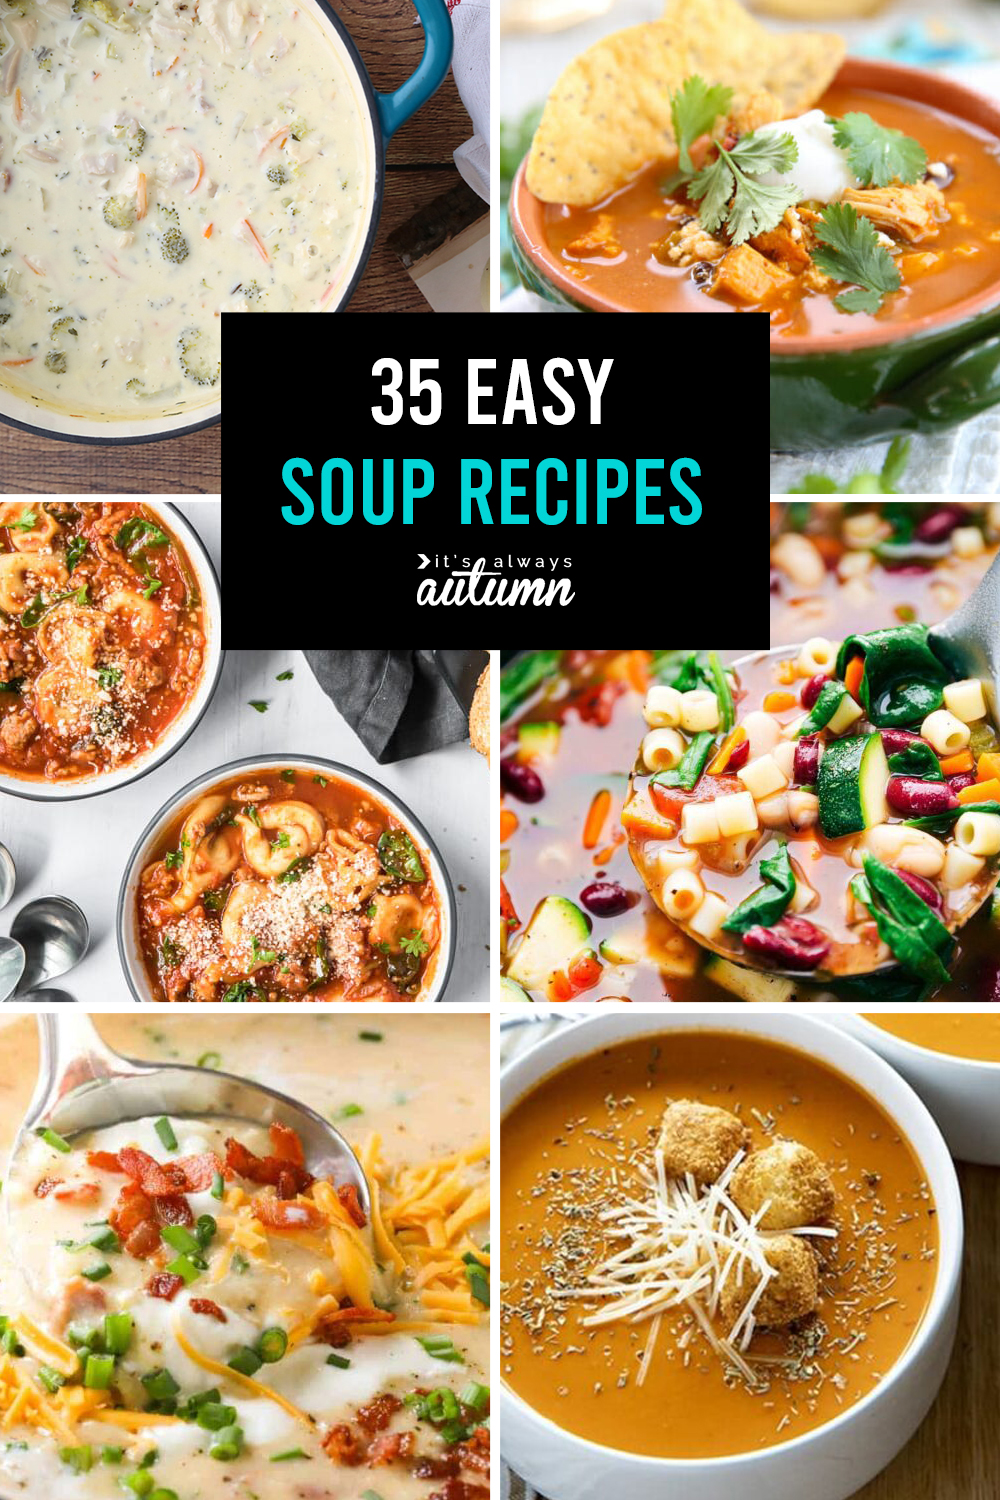 35 Easy Soup Recipes the whole family will love - It's Always Autumn